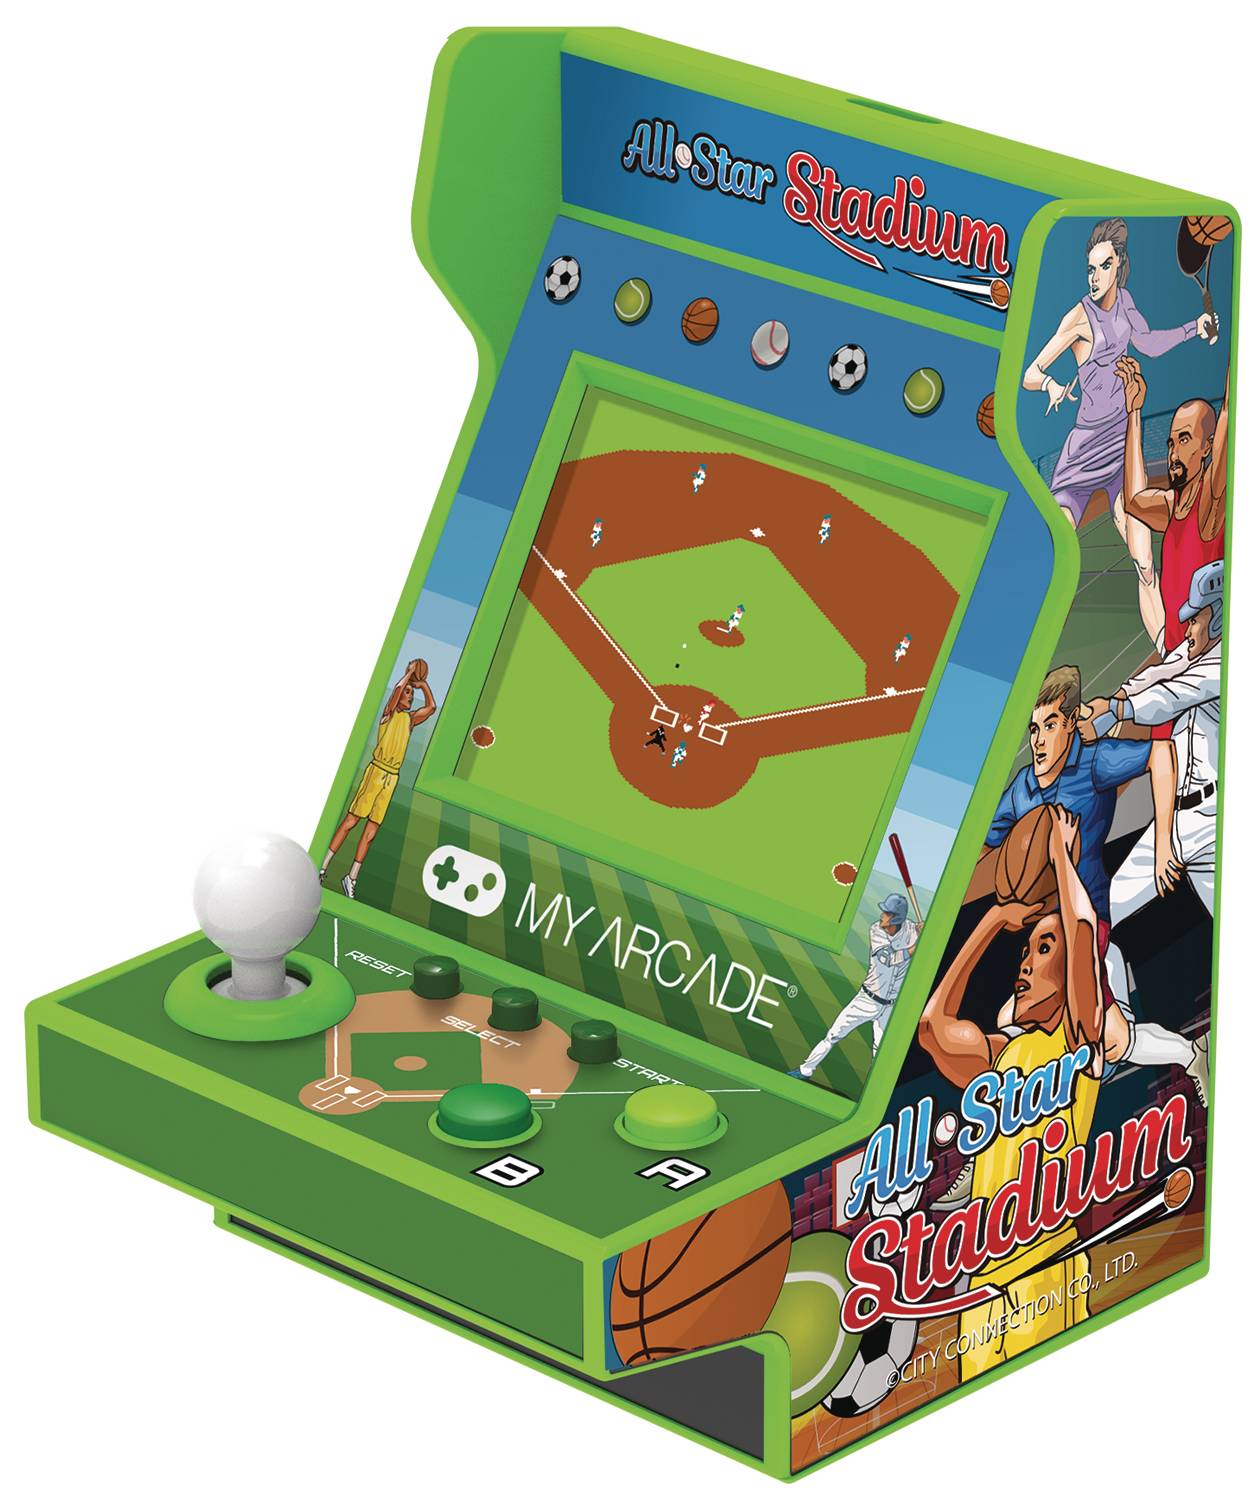 PICO PLAYER 3.7IN ALL-STAR STADIUM COLLECTIBLE RETRO SYSTEM